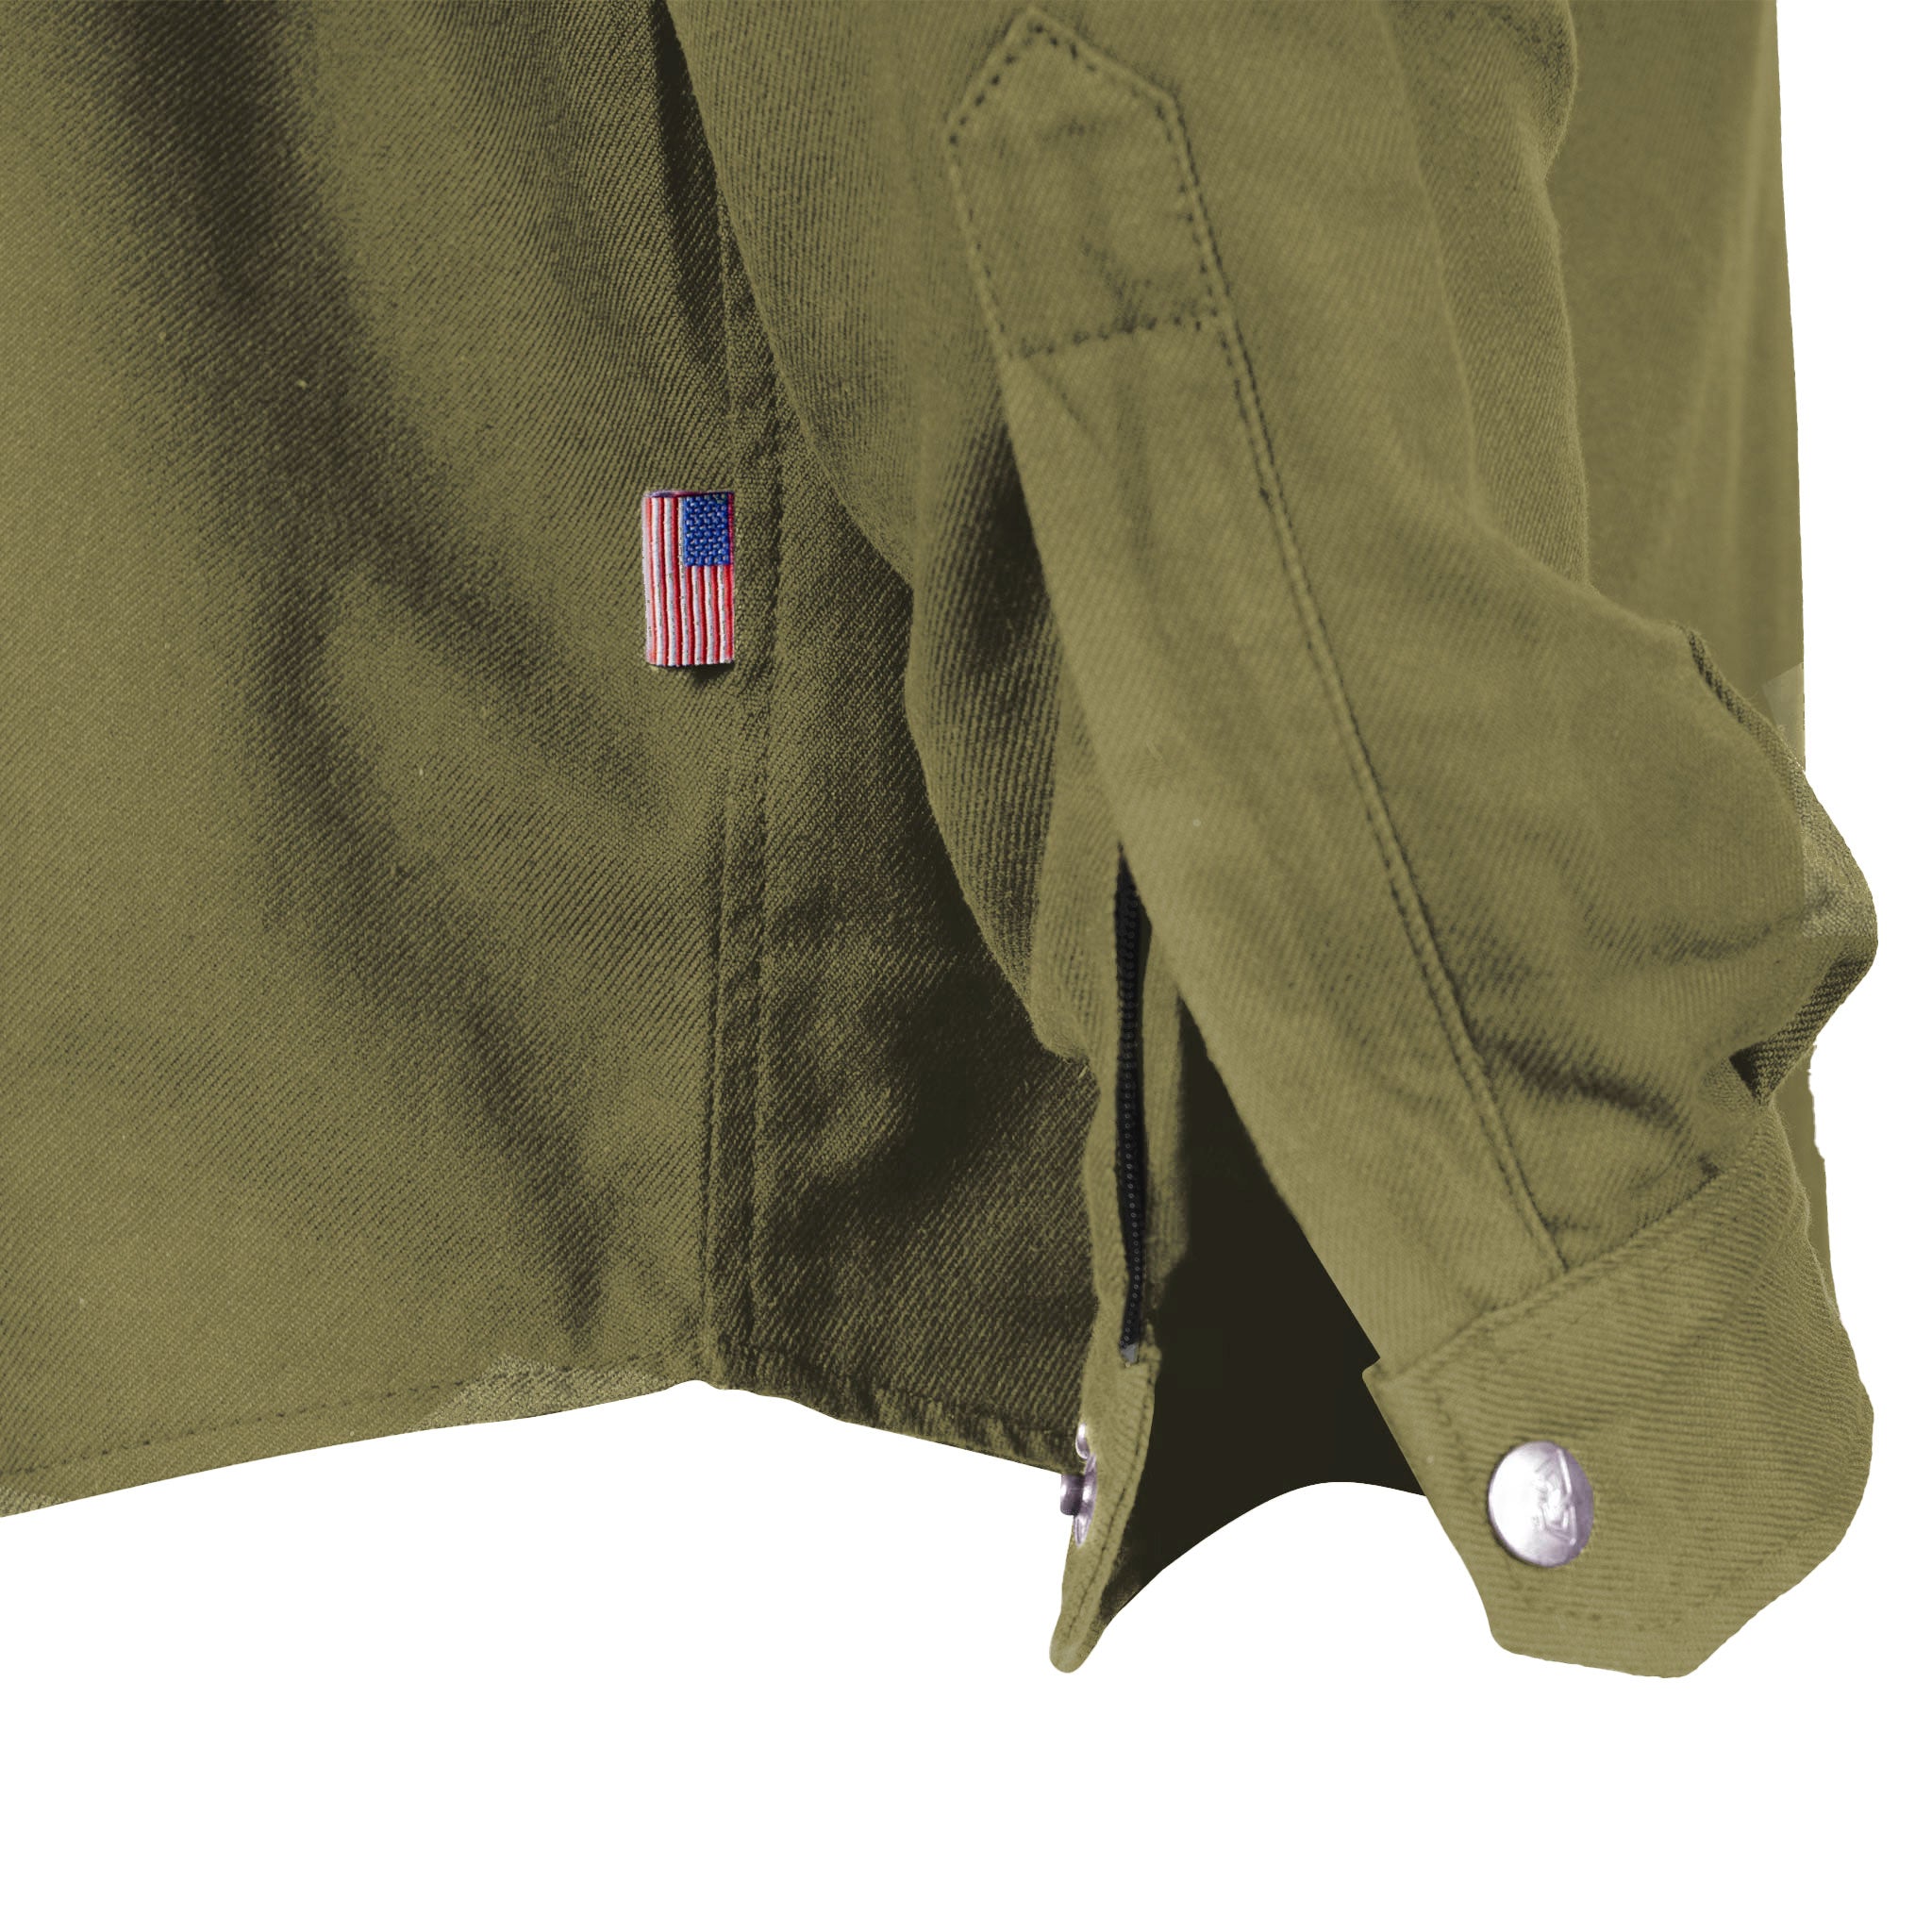 Protective Flannel Shirt - Army Green Solid with Pads